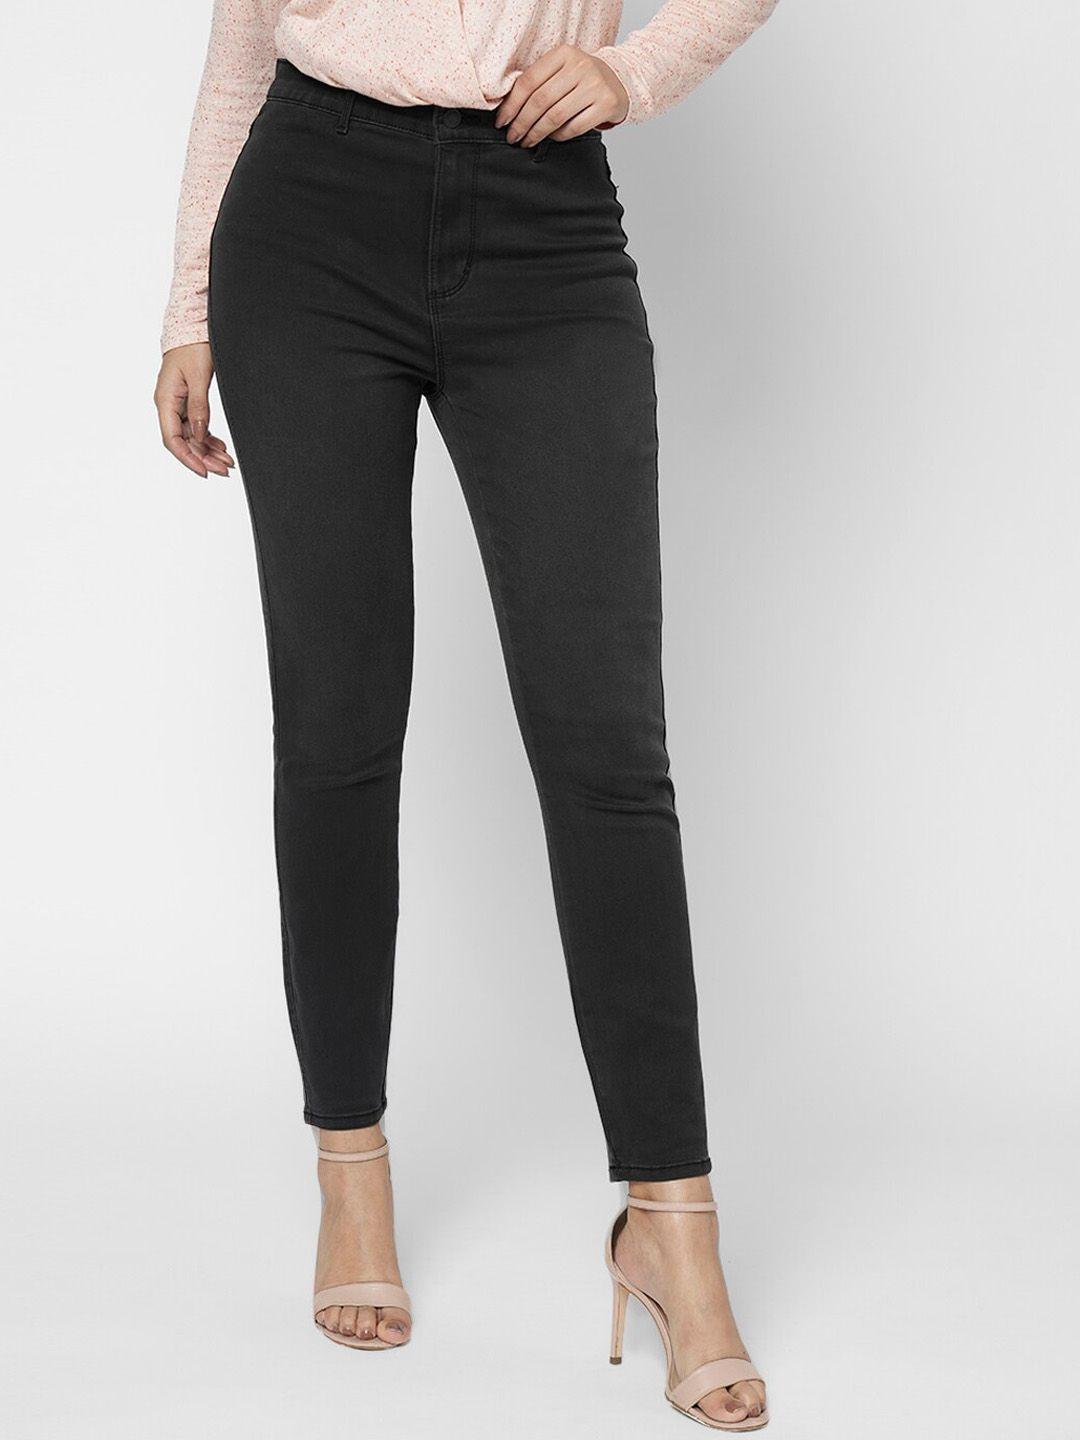 Vero Moda Women Grey Skinny Fit Clean Look High Rise Stretchable Jeans